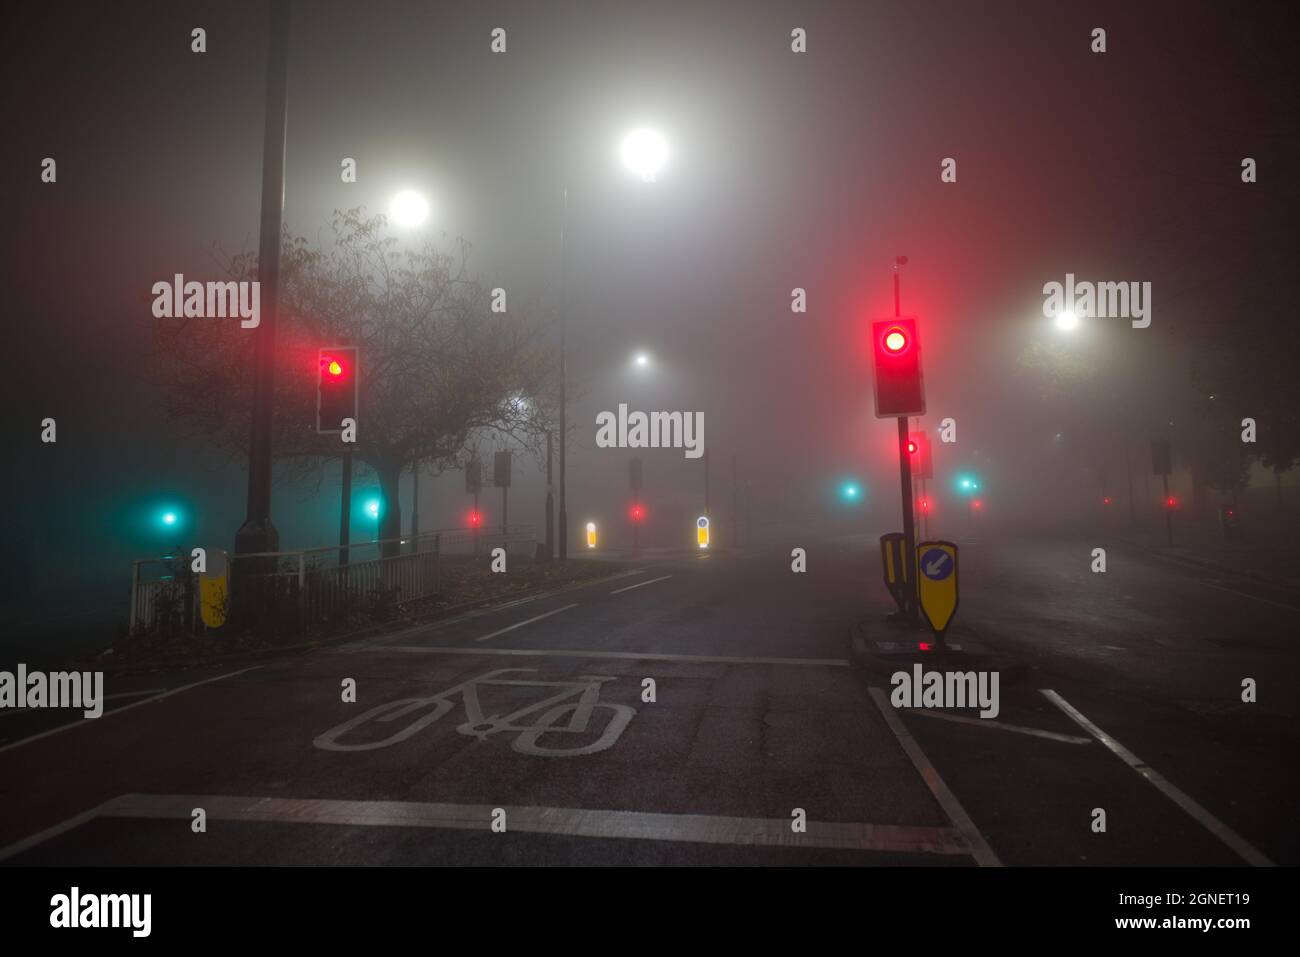 Synes Skat stereoanlæg Extremely foggy night time conditions at a junction of two english B roads.  Many traffic lights and street lights shine through the atmospheric haze  Stock Photo - Alamy